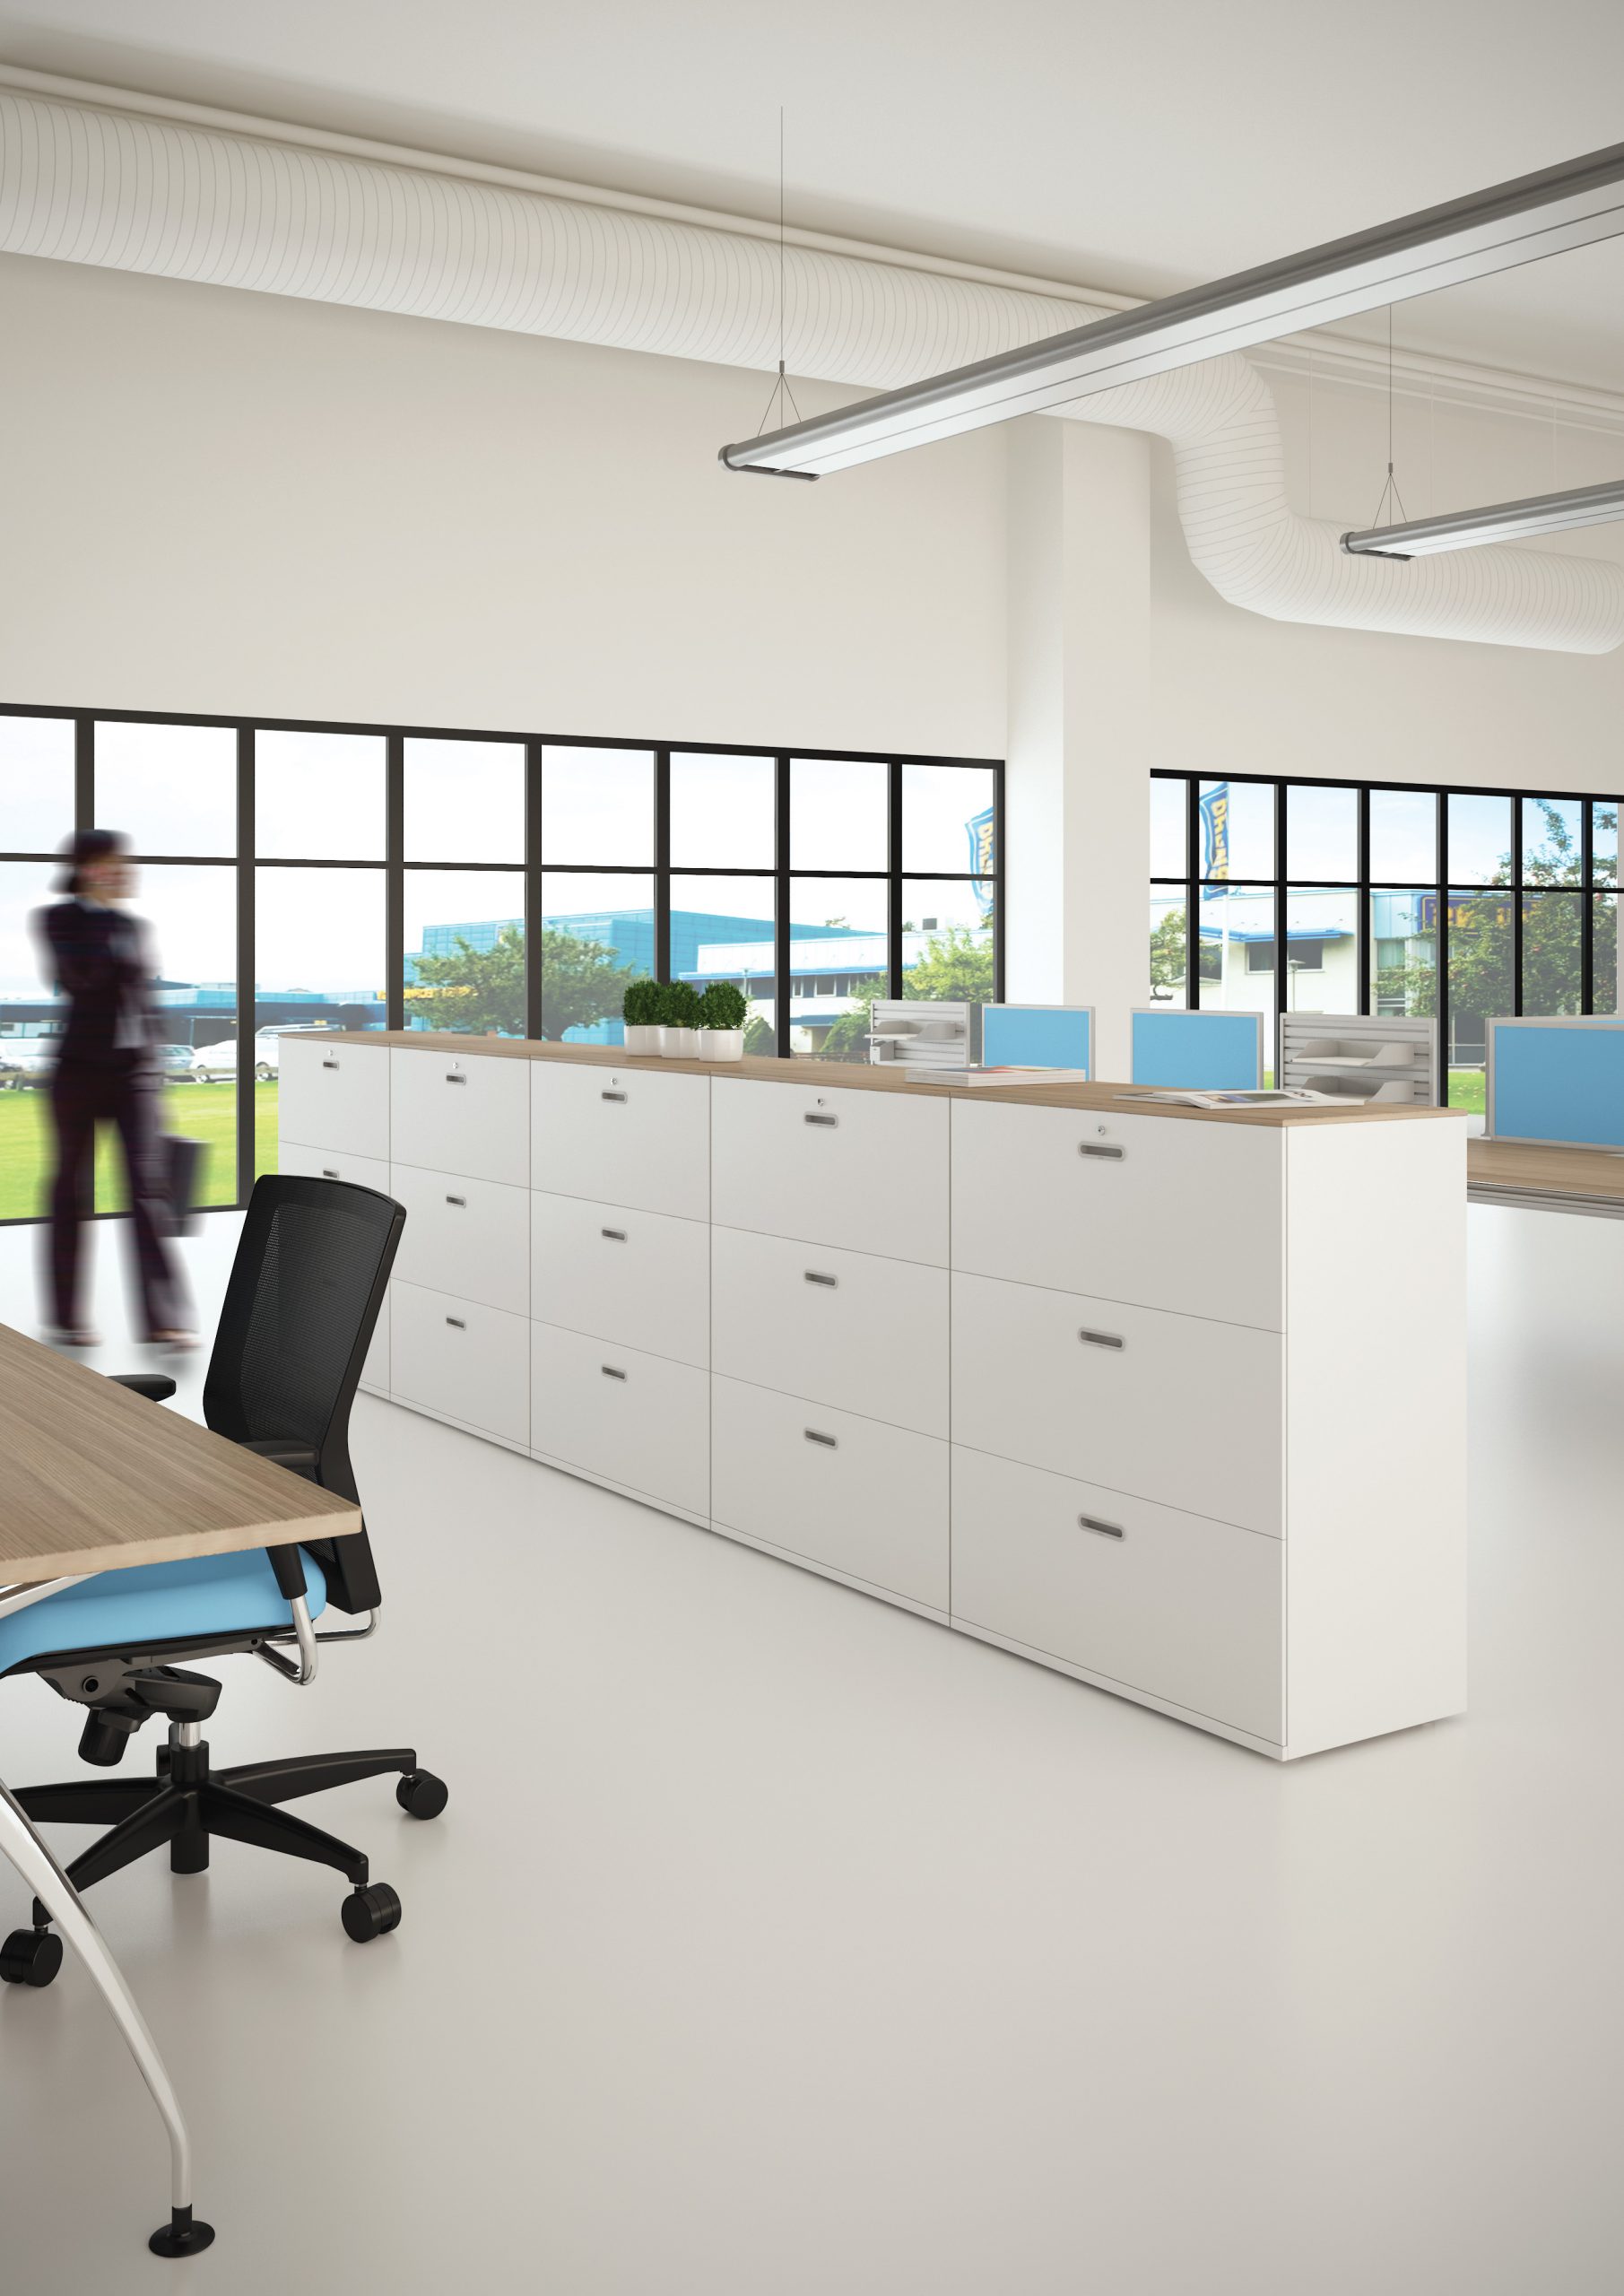 A row of Keep lateral filing cabinets in an open space office